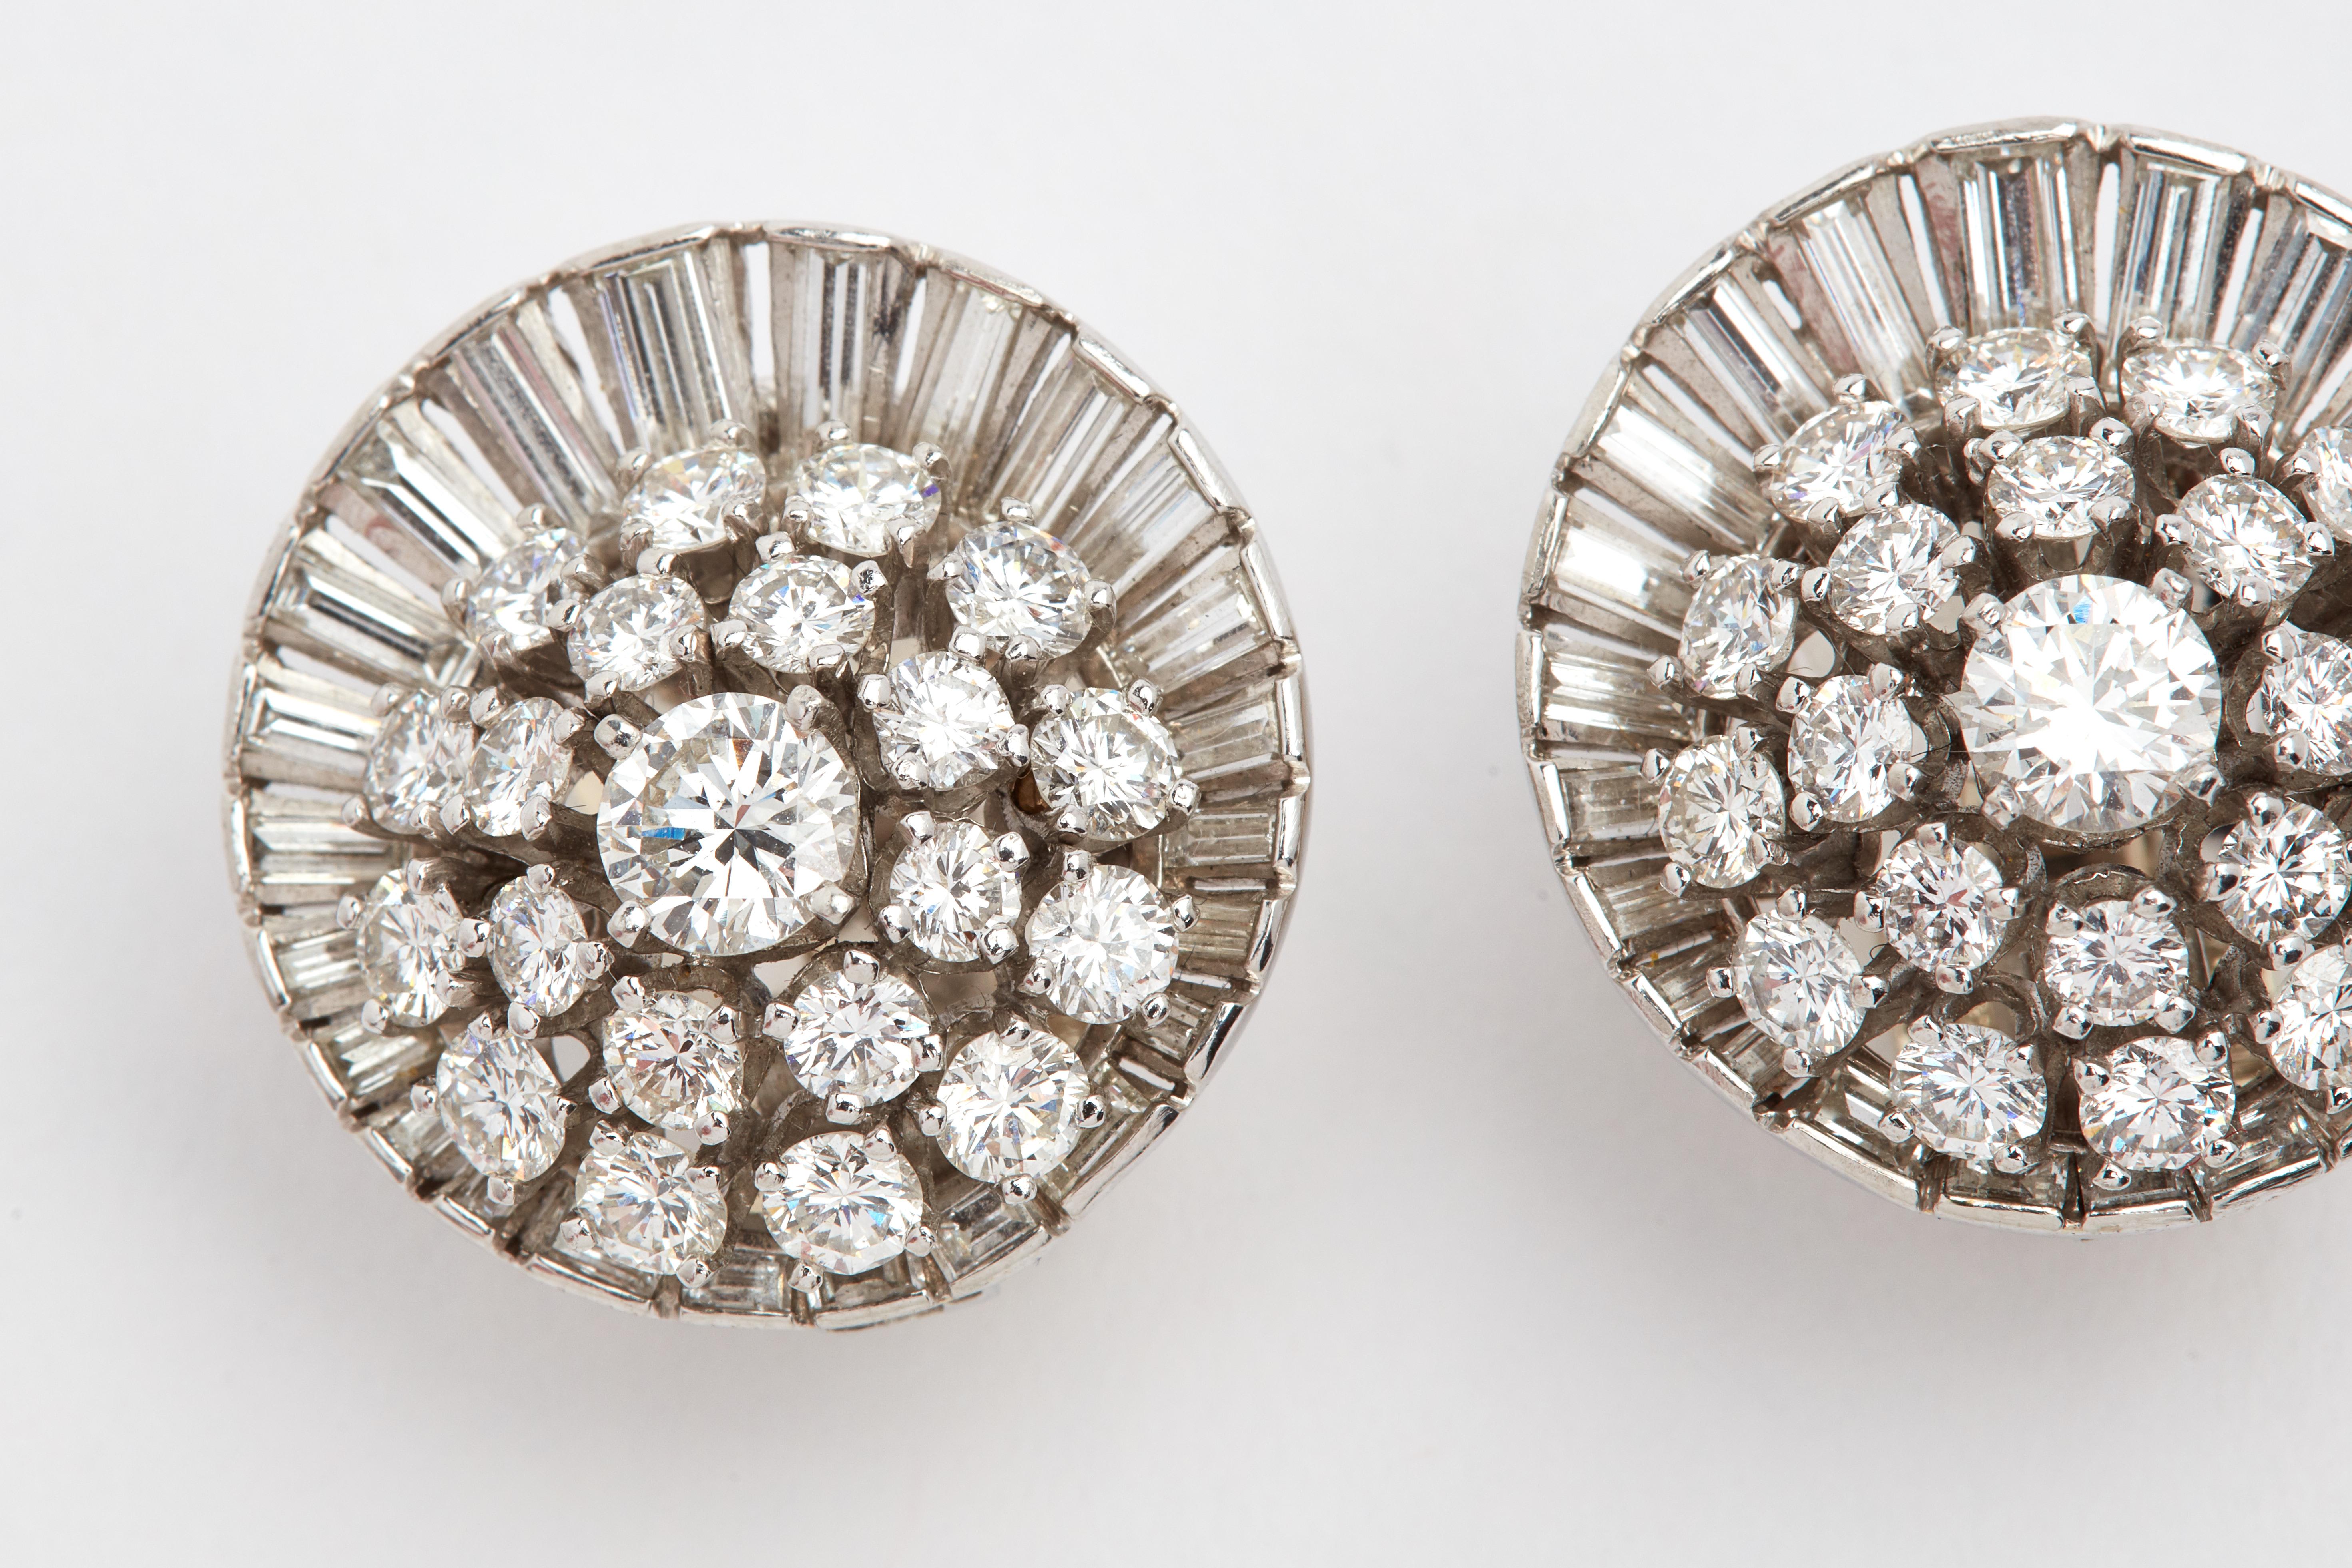 Platinum Satellite Diamond Ear Clips with aprox 10 carats of white diamonds. 1 inch in diameter. 50 Baguettes (aprox 3.50 carats). 48 Round diamonds (aprox 5 carats) 2 center diamonds weighing aprox 1.50 carats total. G color and VS quality Diamonds 